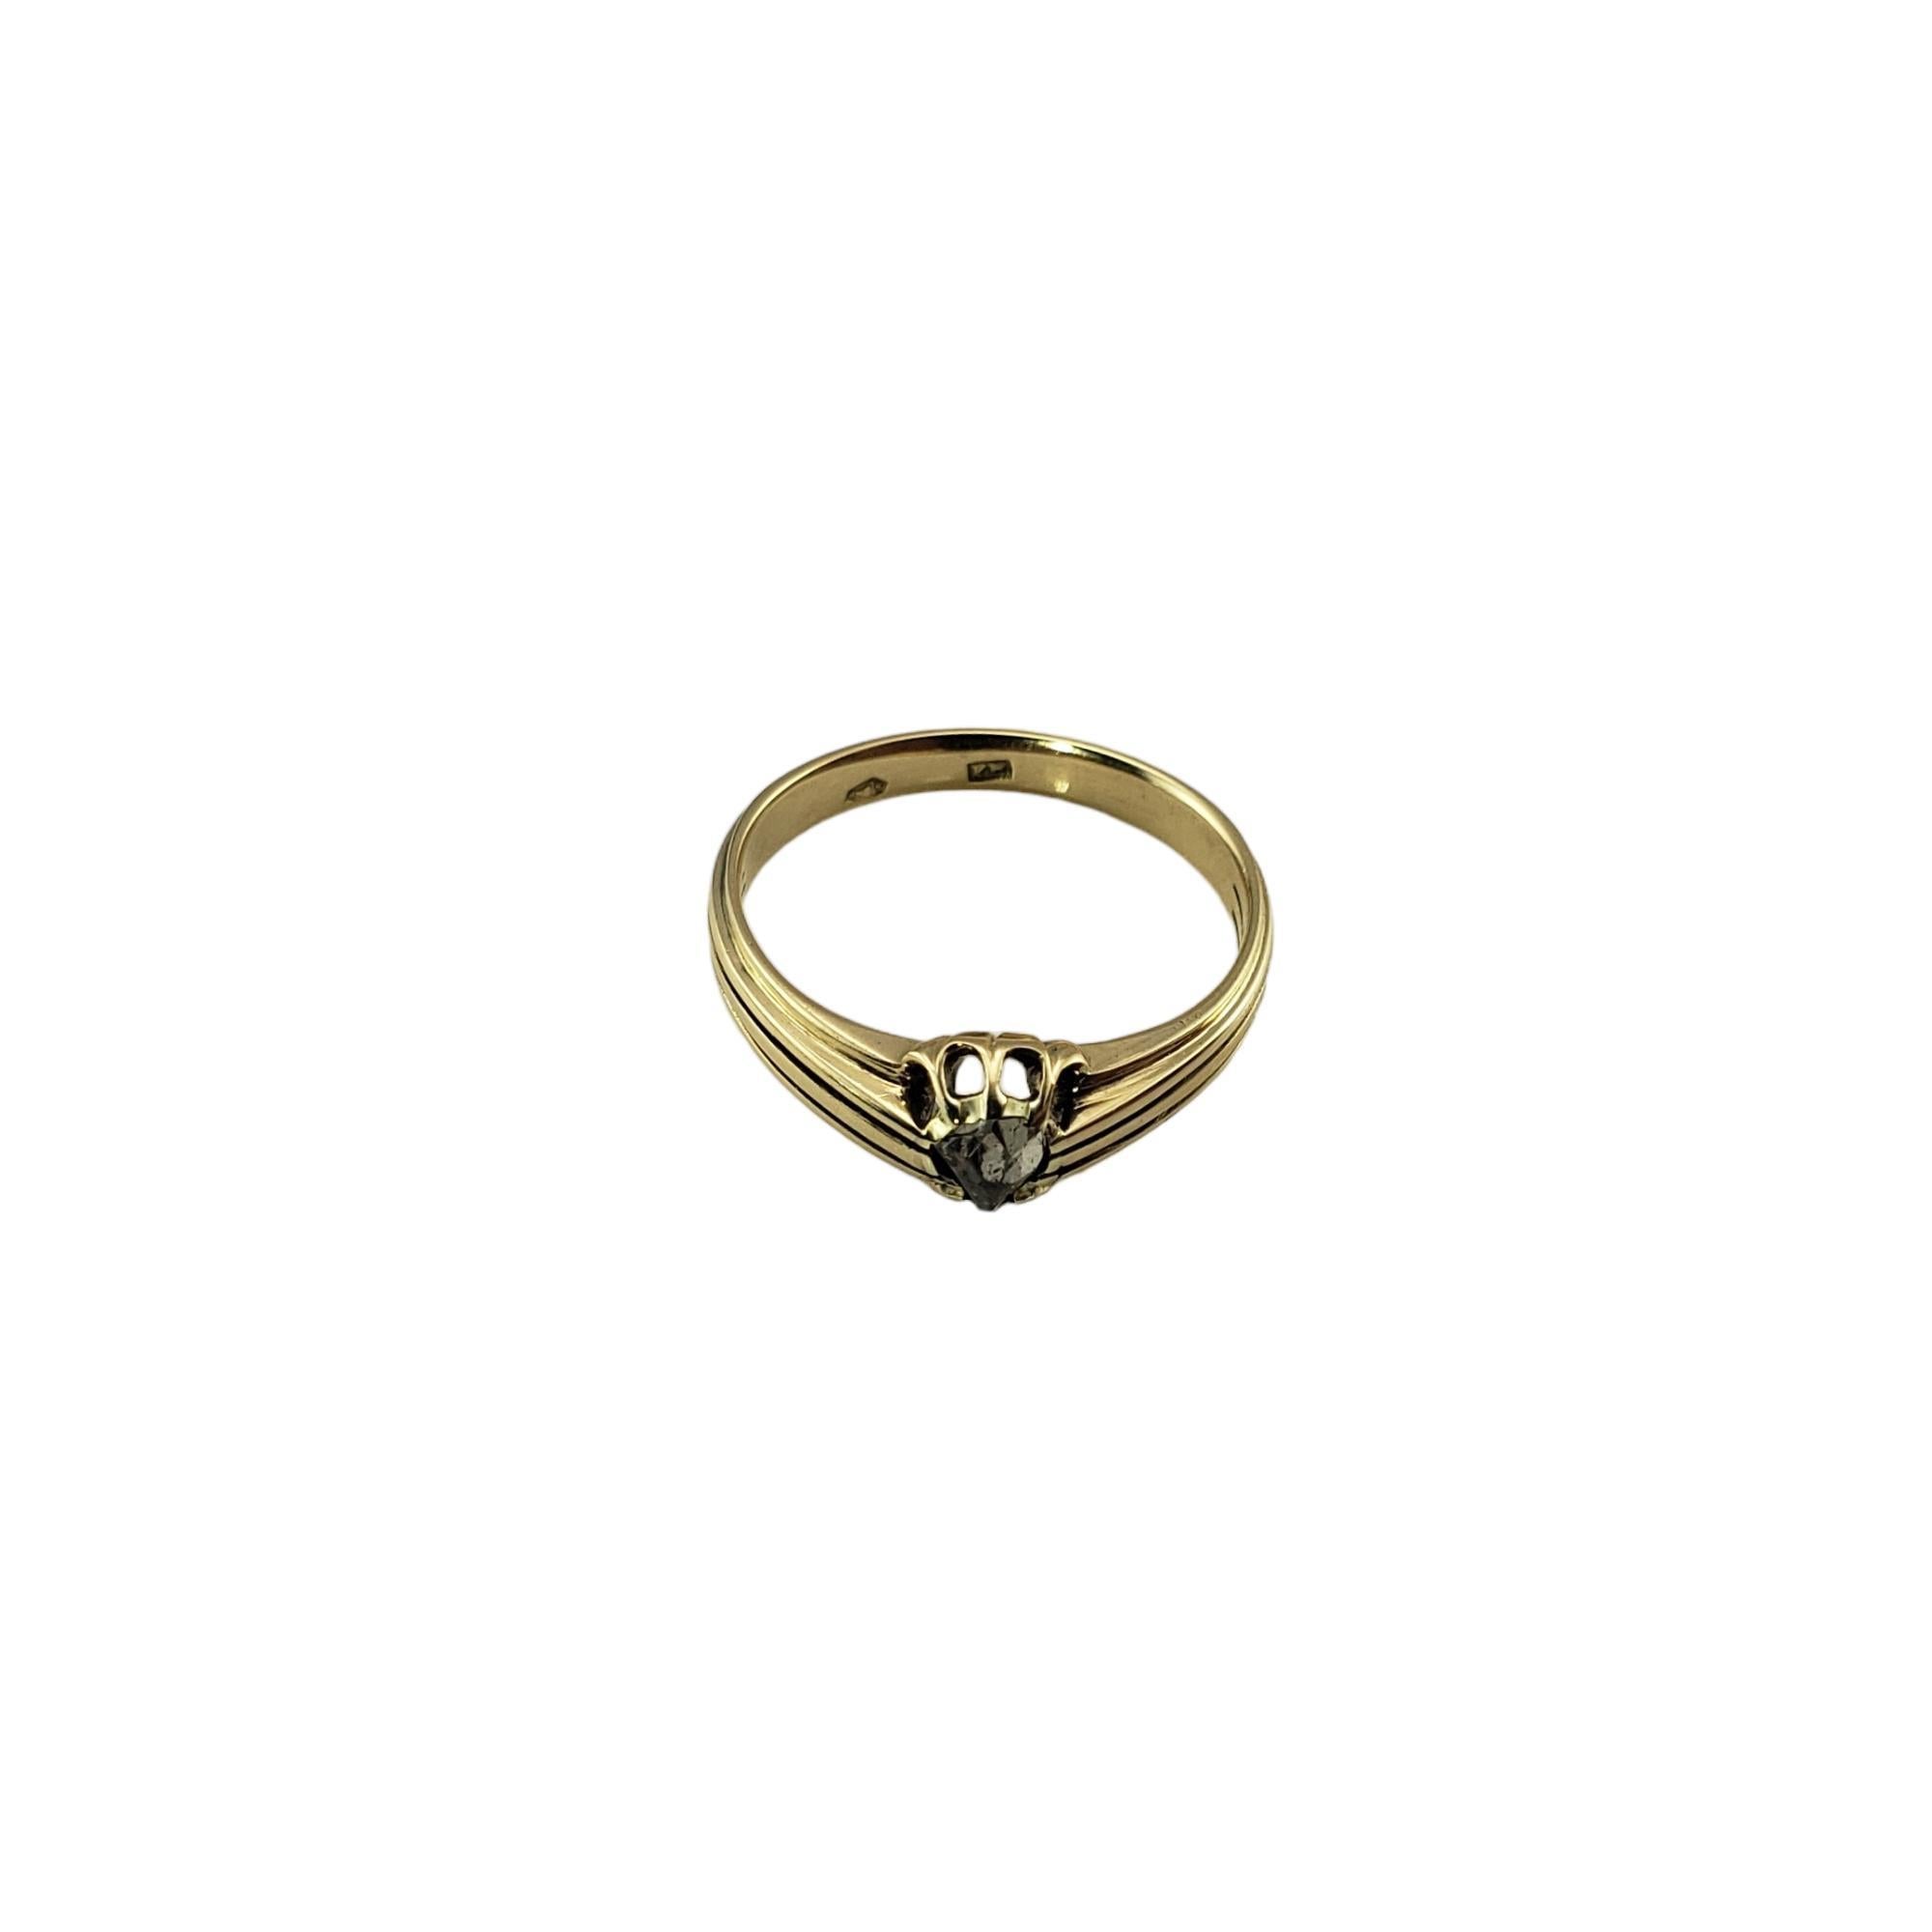 Vintage 10 Karat Yellow Gold and Diamond Ring Size 6.75-

This elegant ring features one antique cut diamond* set in beautifully detailed 10K yellow gold.  Width:  6 mm.  Shank:  2.7 mm.

*Some chips and abrasions noted to stone.

Total diamond